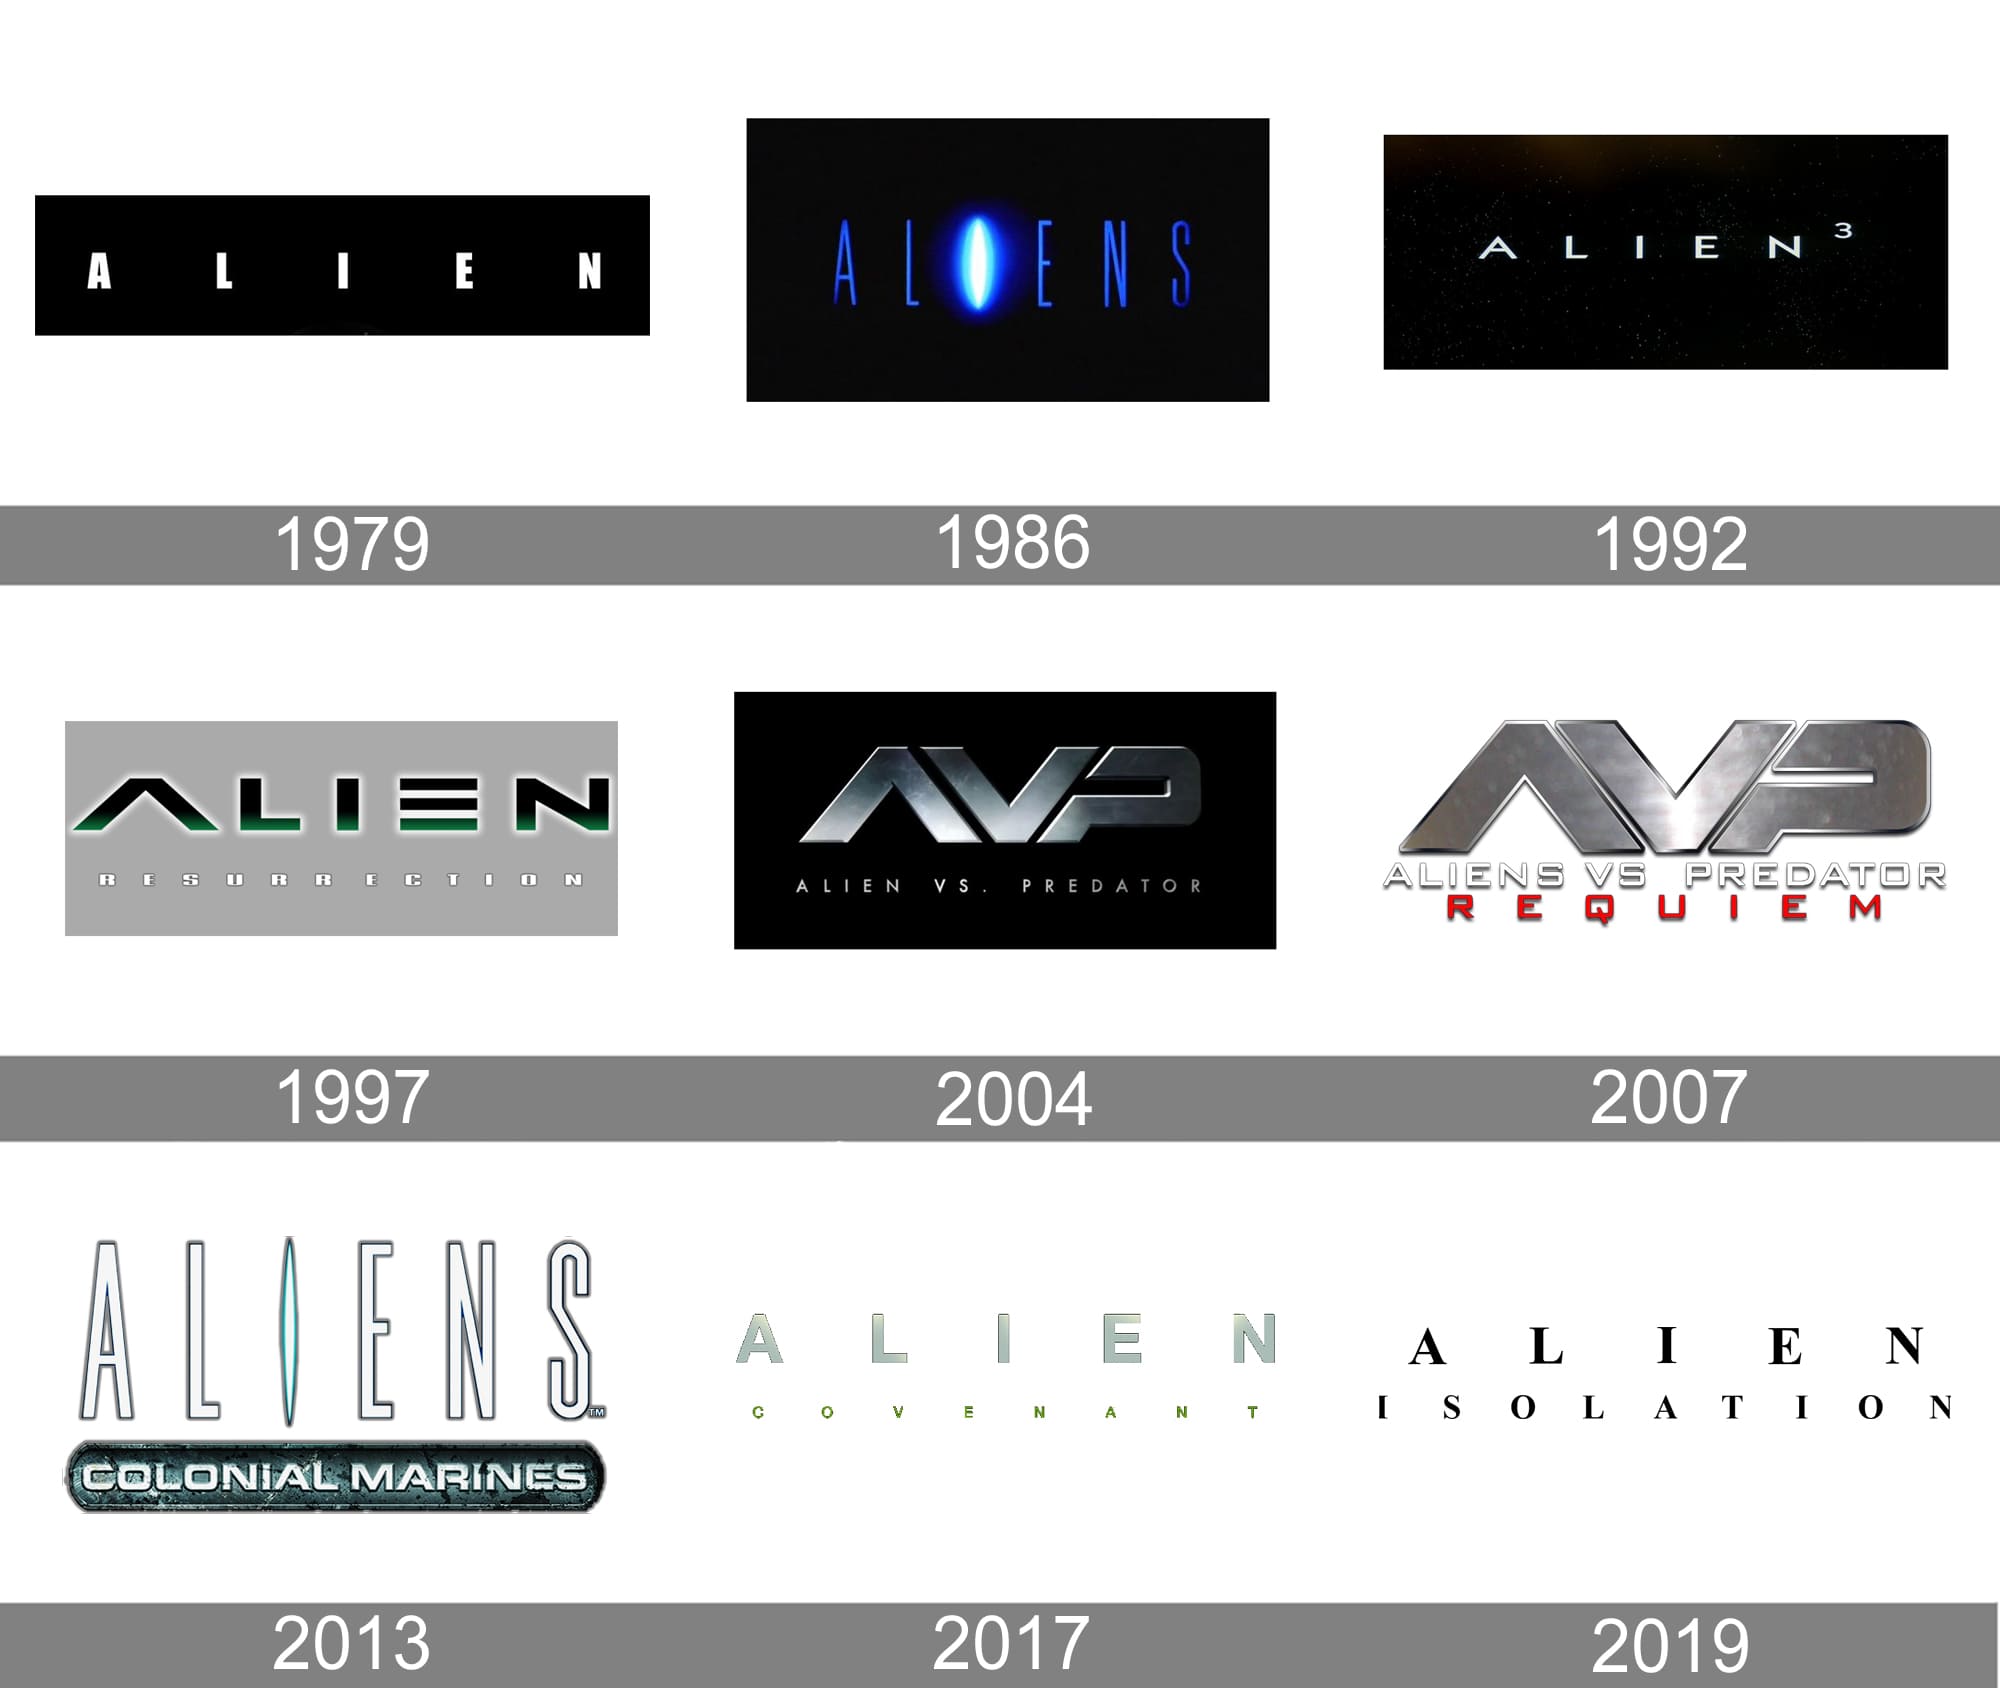 Is there an established chronological timeline for the Alien